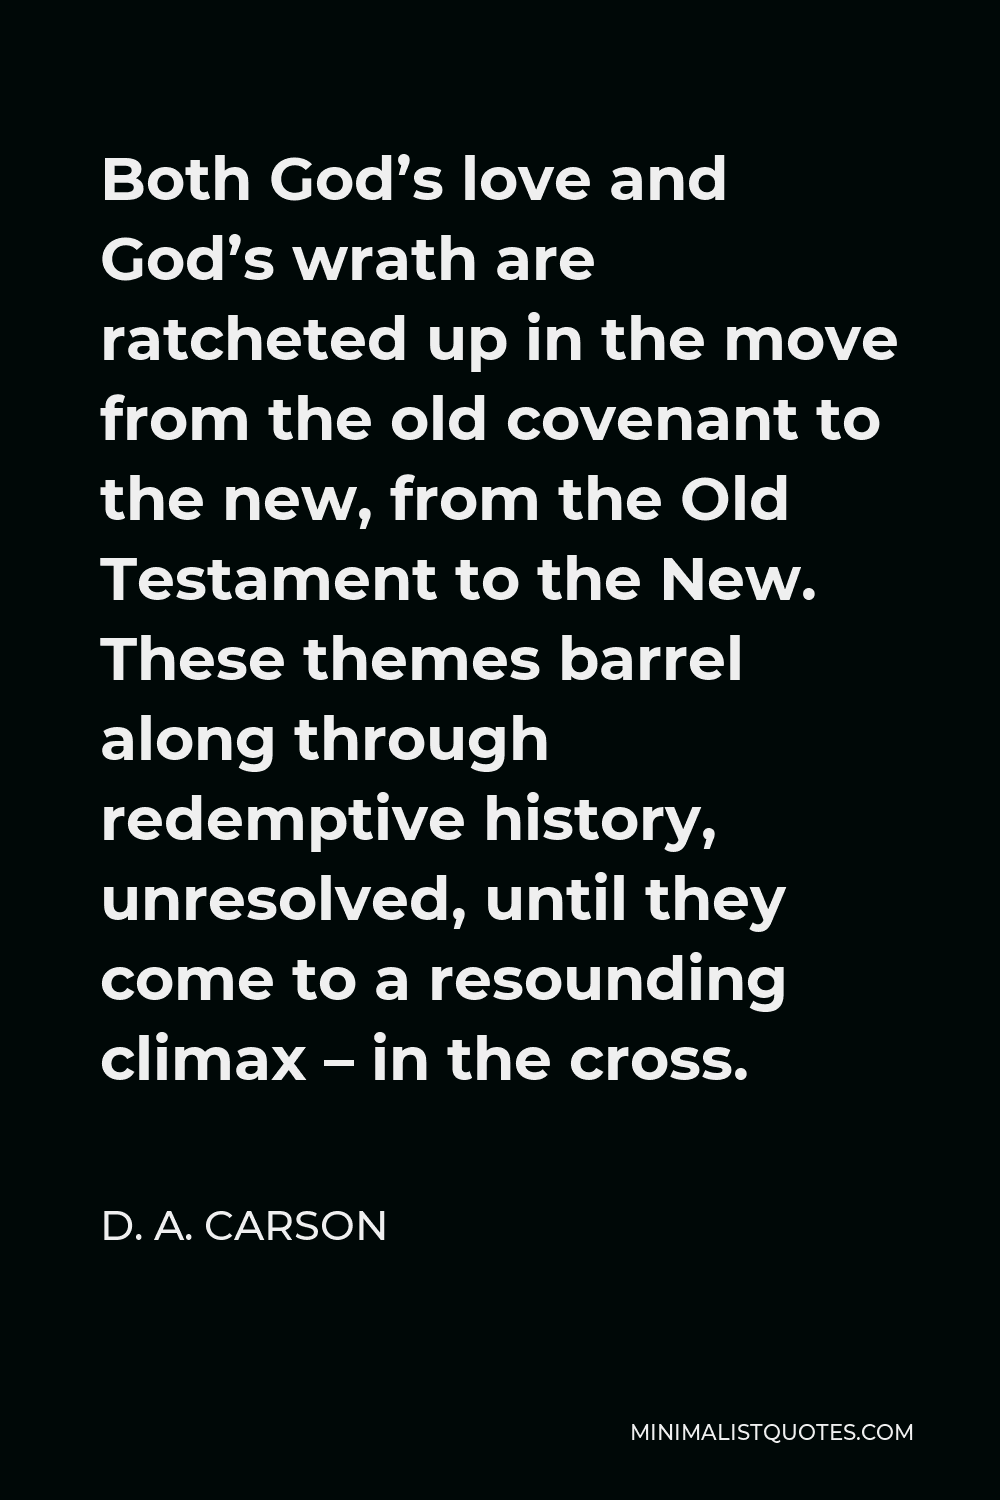 D. A. Carson Quote - Both God’s love and God’s wrath are ratcheted up in the move from the old covenant to the new, from the Old Testament to the New. These themes barrel along through redemptive history, unresolved, until they come to a resounding climax – in the cross.